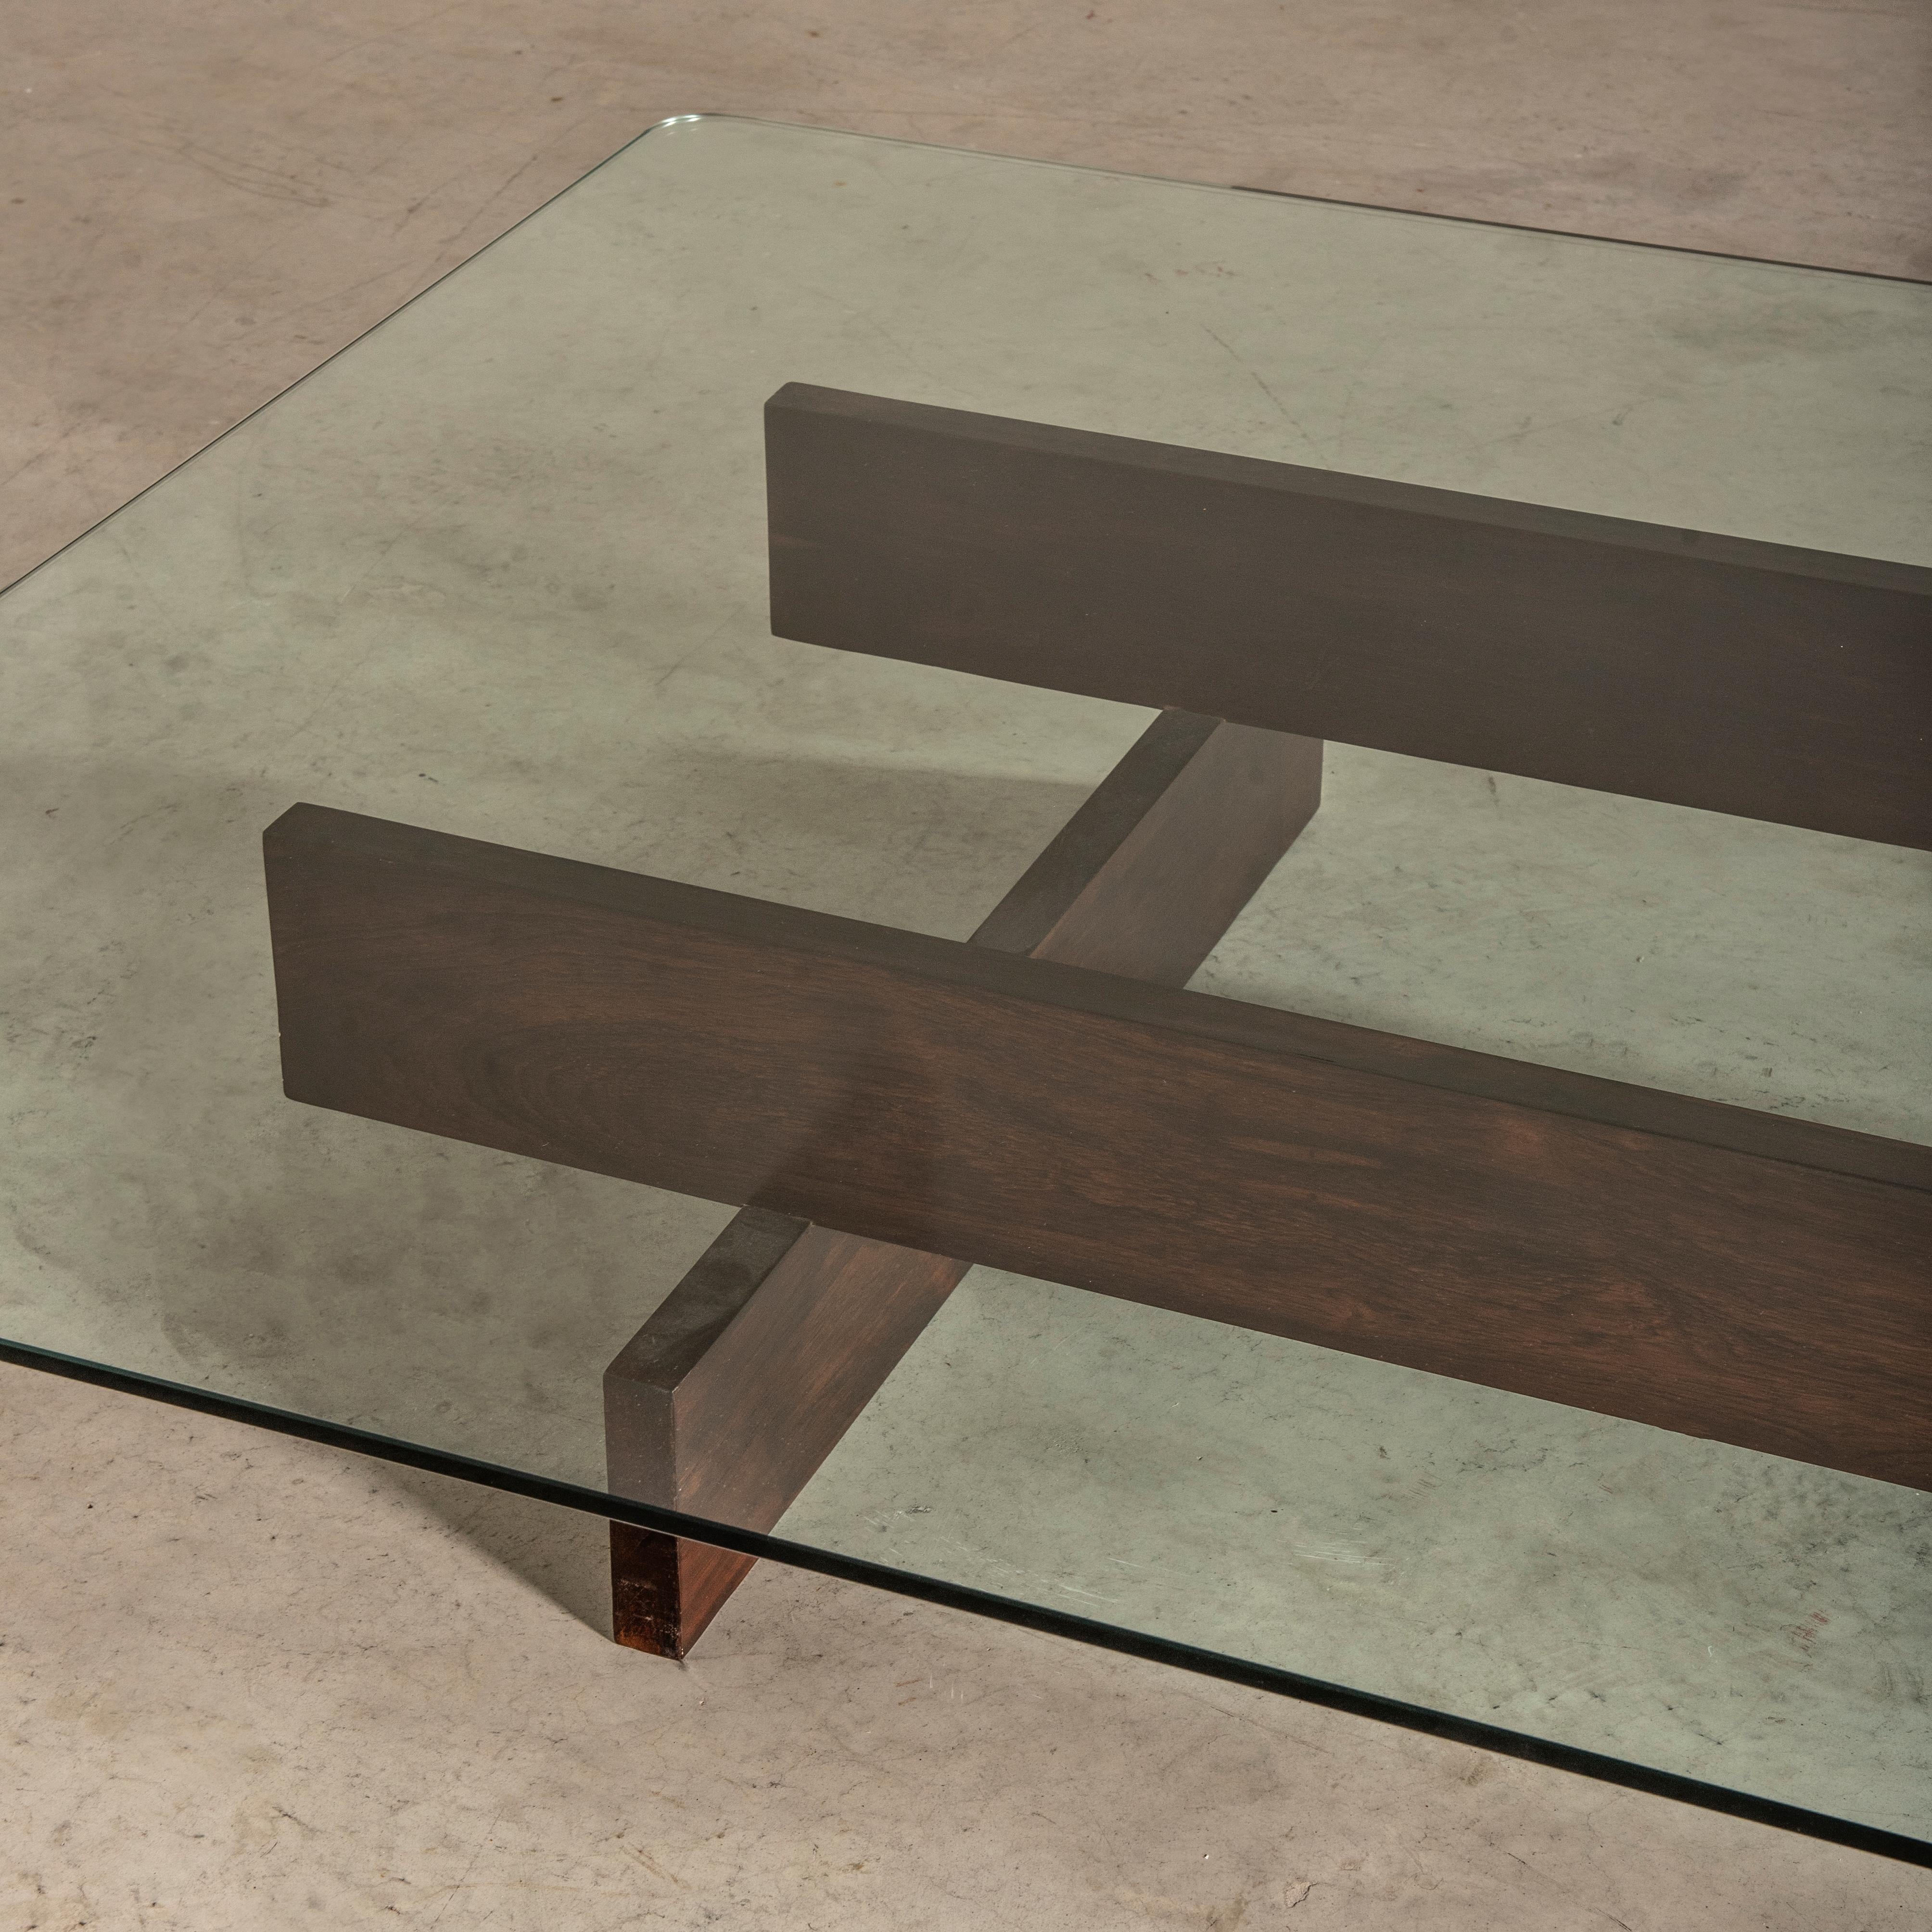 Grand Coffee Table in Wood and Glass by Celina Decorações, Brazilian Midcentury For Sale 3